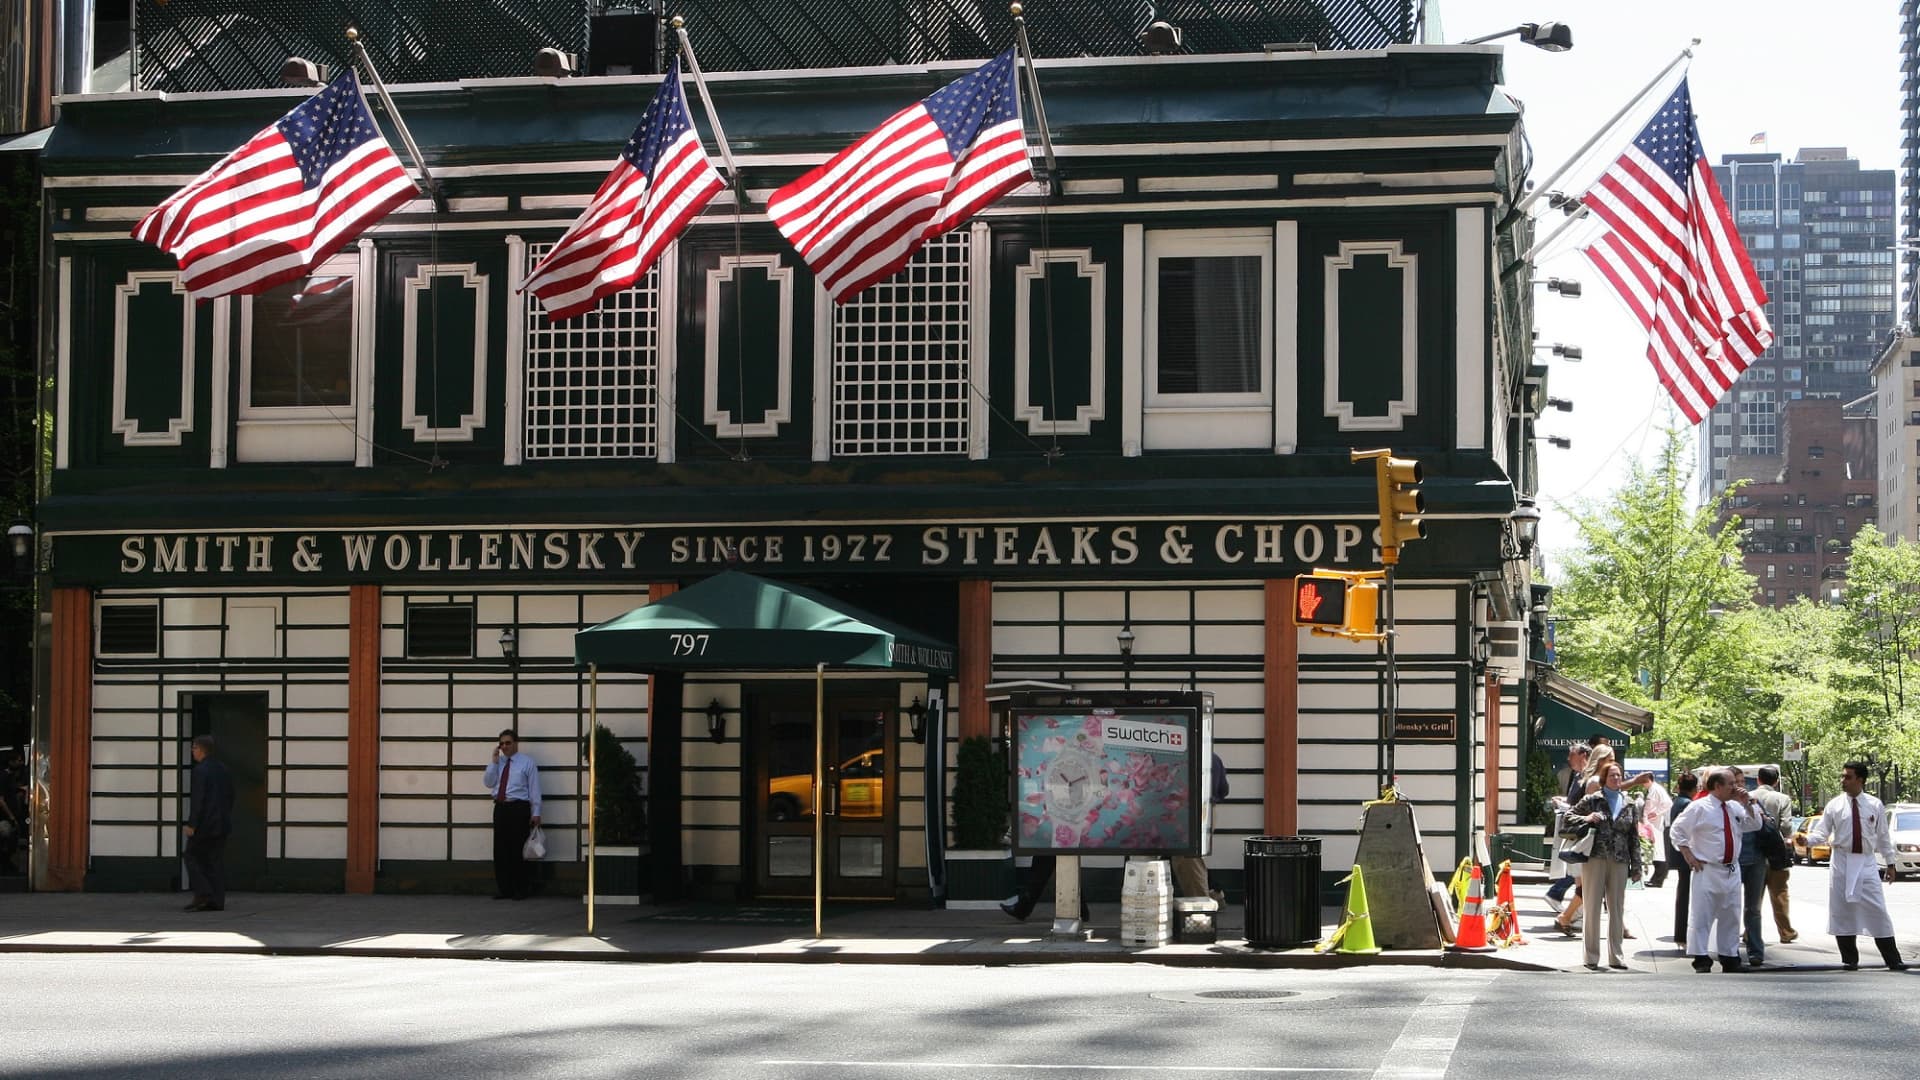 Smith & Wollensky steakhouse is photographed on Wednesday, May 9, 2007, in New York.